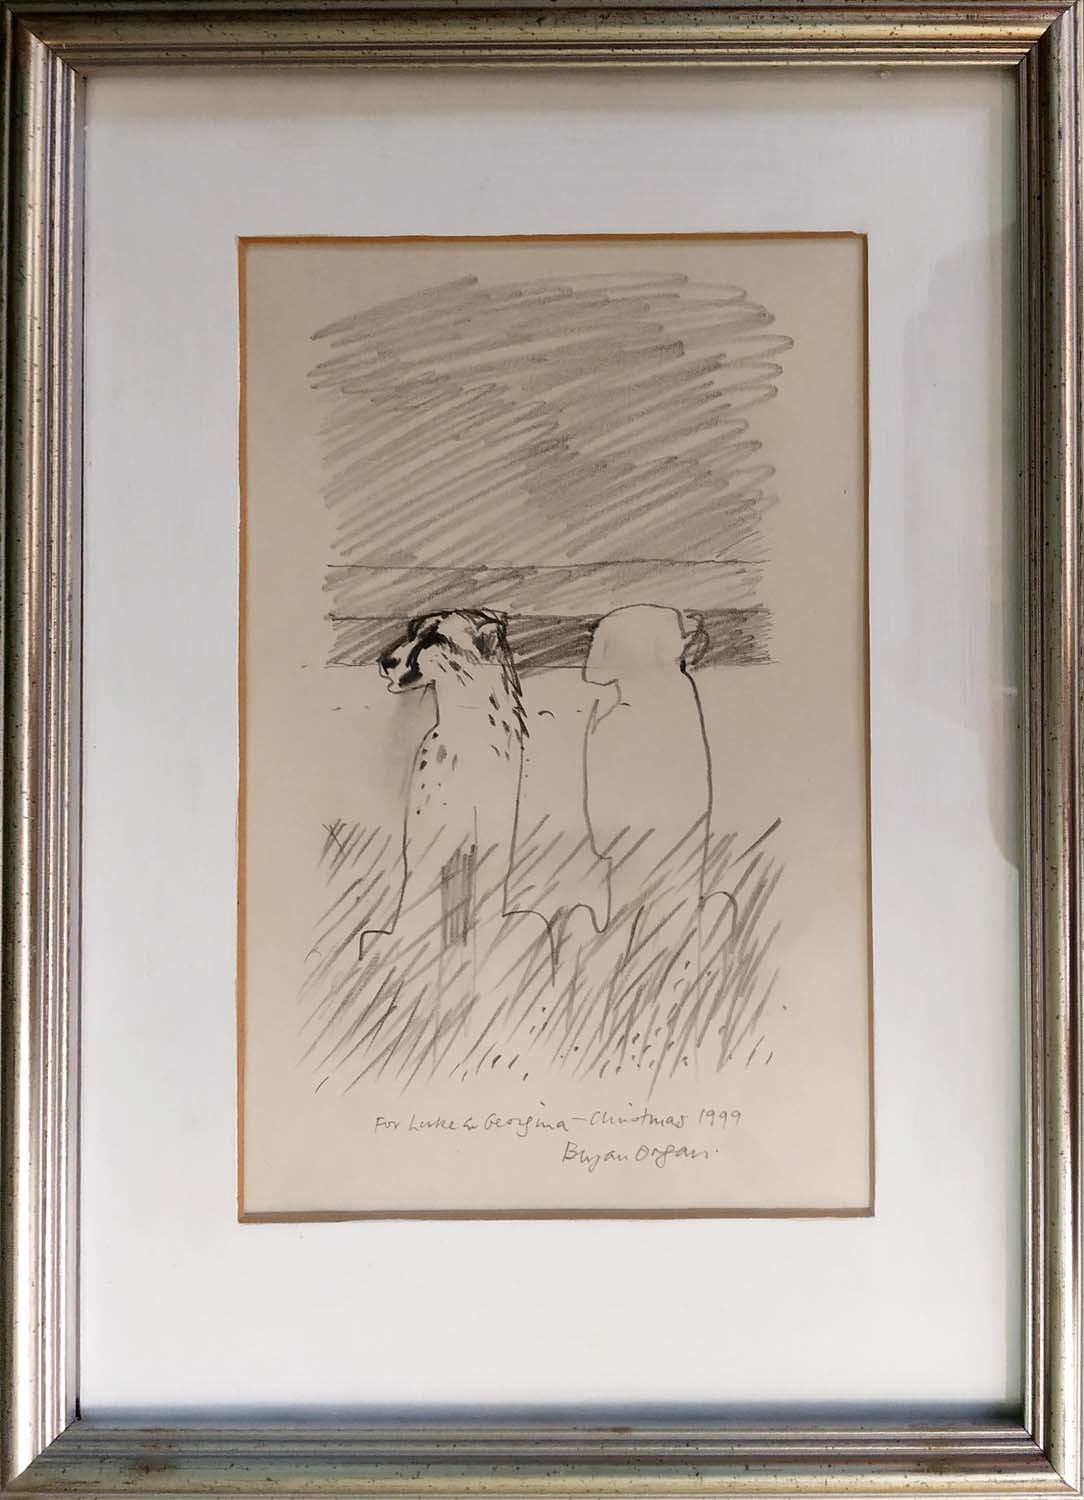 BRYAN ORGAN 'Seated Leopards', pencil drawing, signed and inscribed, 32cm x 23cm, framed. (Subject